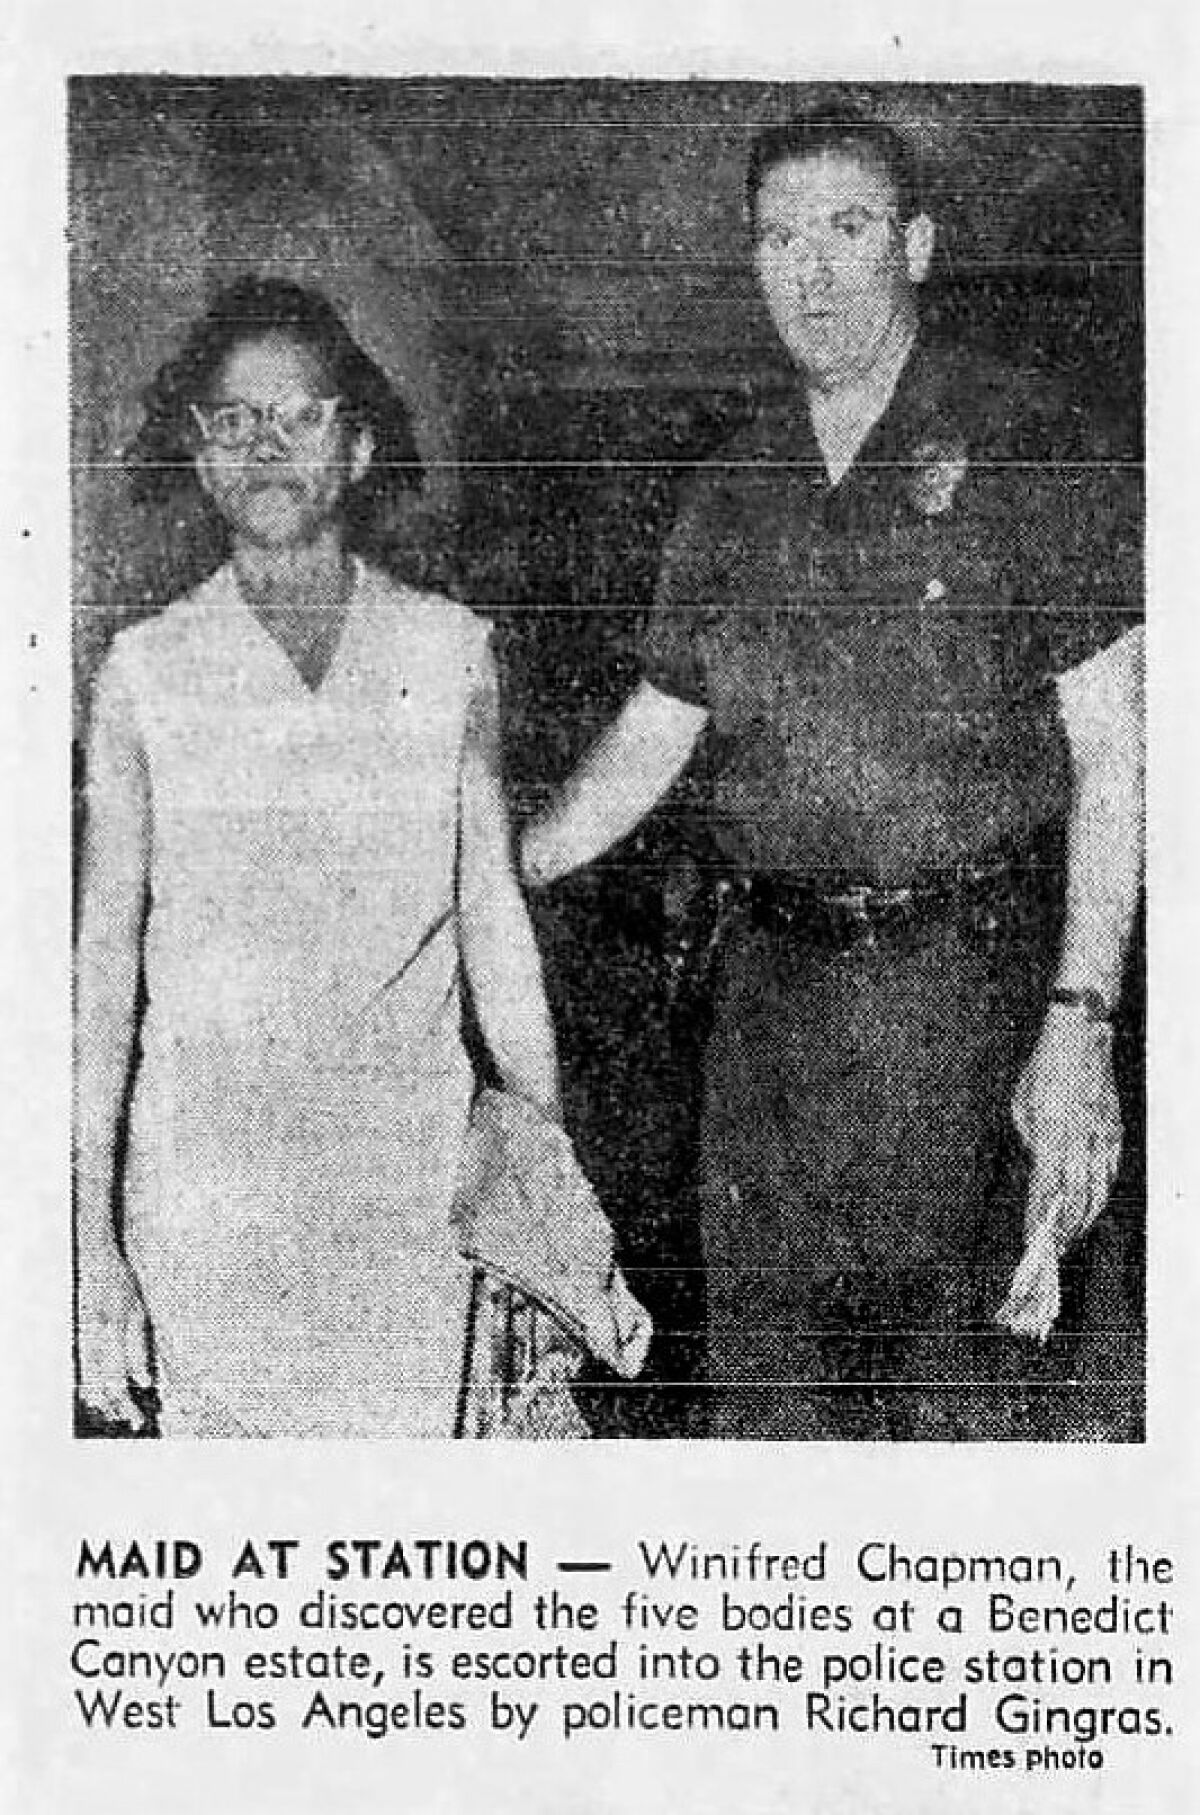 Archival photo from Aug. 10, 1969, of Winifred Chapman